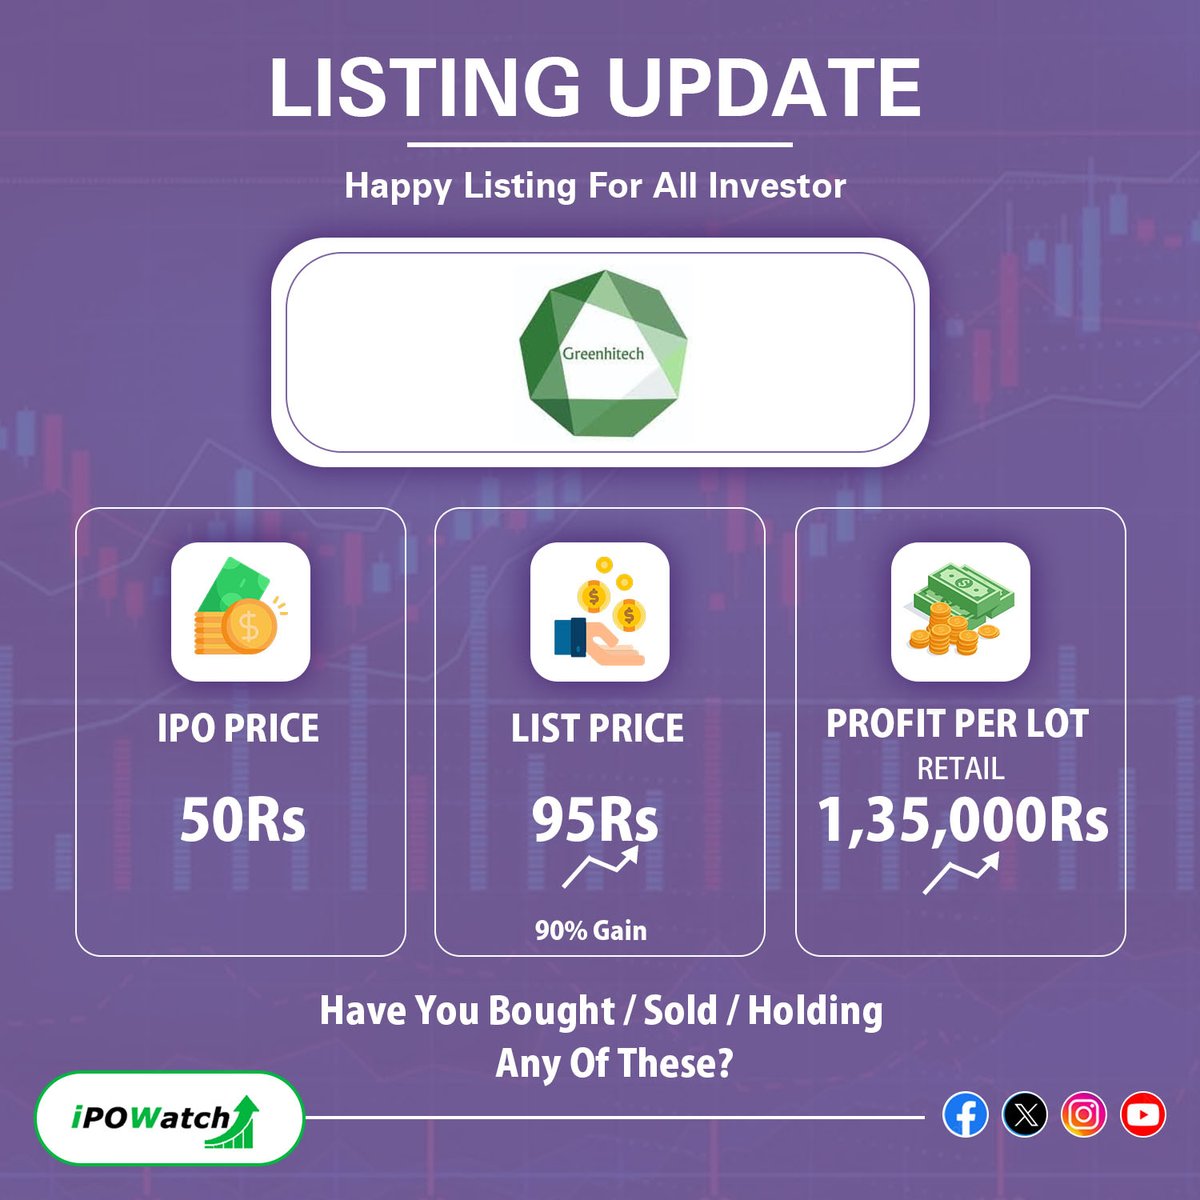 ⮞IPO Alert 🔔Today

🔸 IPO Listing today 🔔🔊
➢ Greenhitech Ventures

Stay connected 🤝 with us for all the IPO-related updates 💪

#ipo #ipowatch #ipoupdates #ipoallotment #ipolisting #sharemarket #ipoalert #greenhitechventureslimited